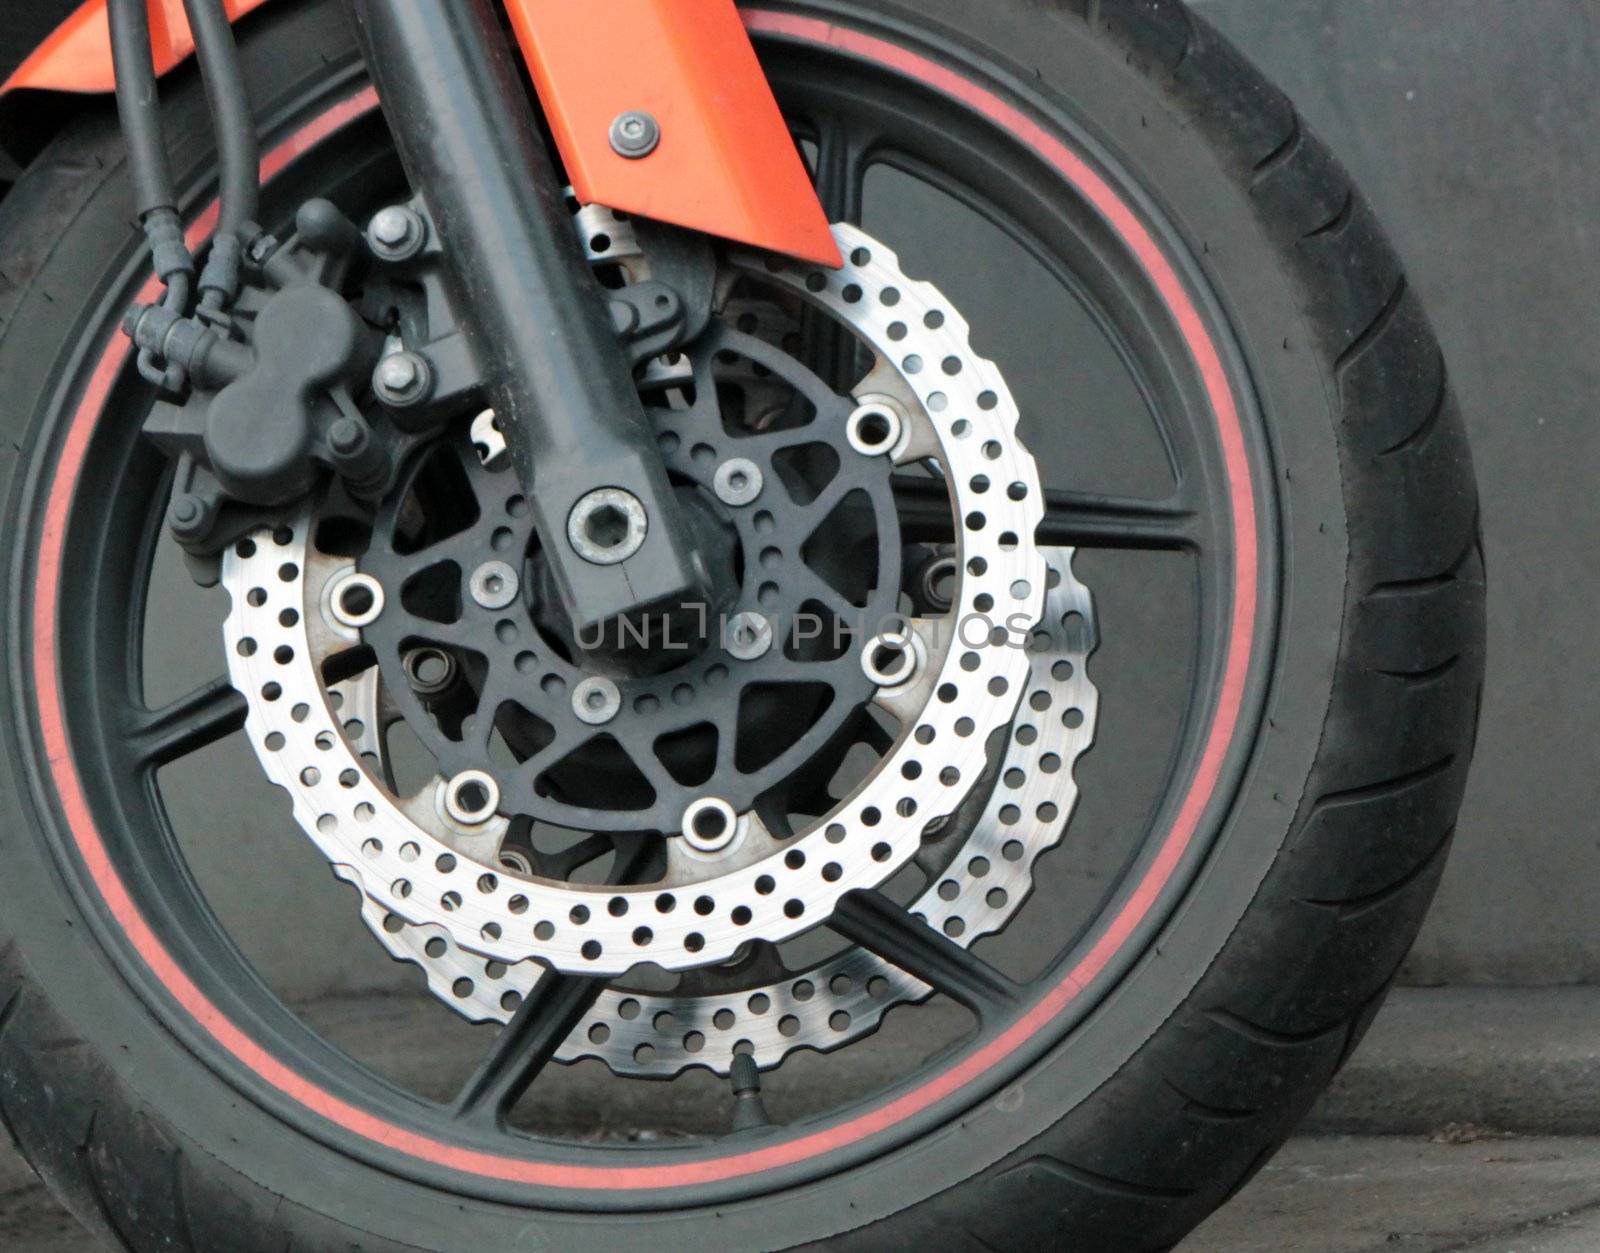 Close up of the front wheel of a red motorbike